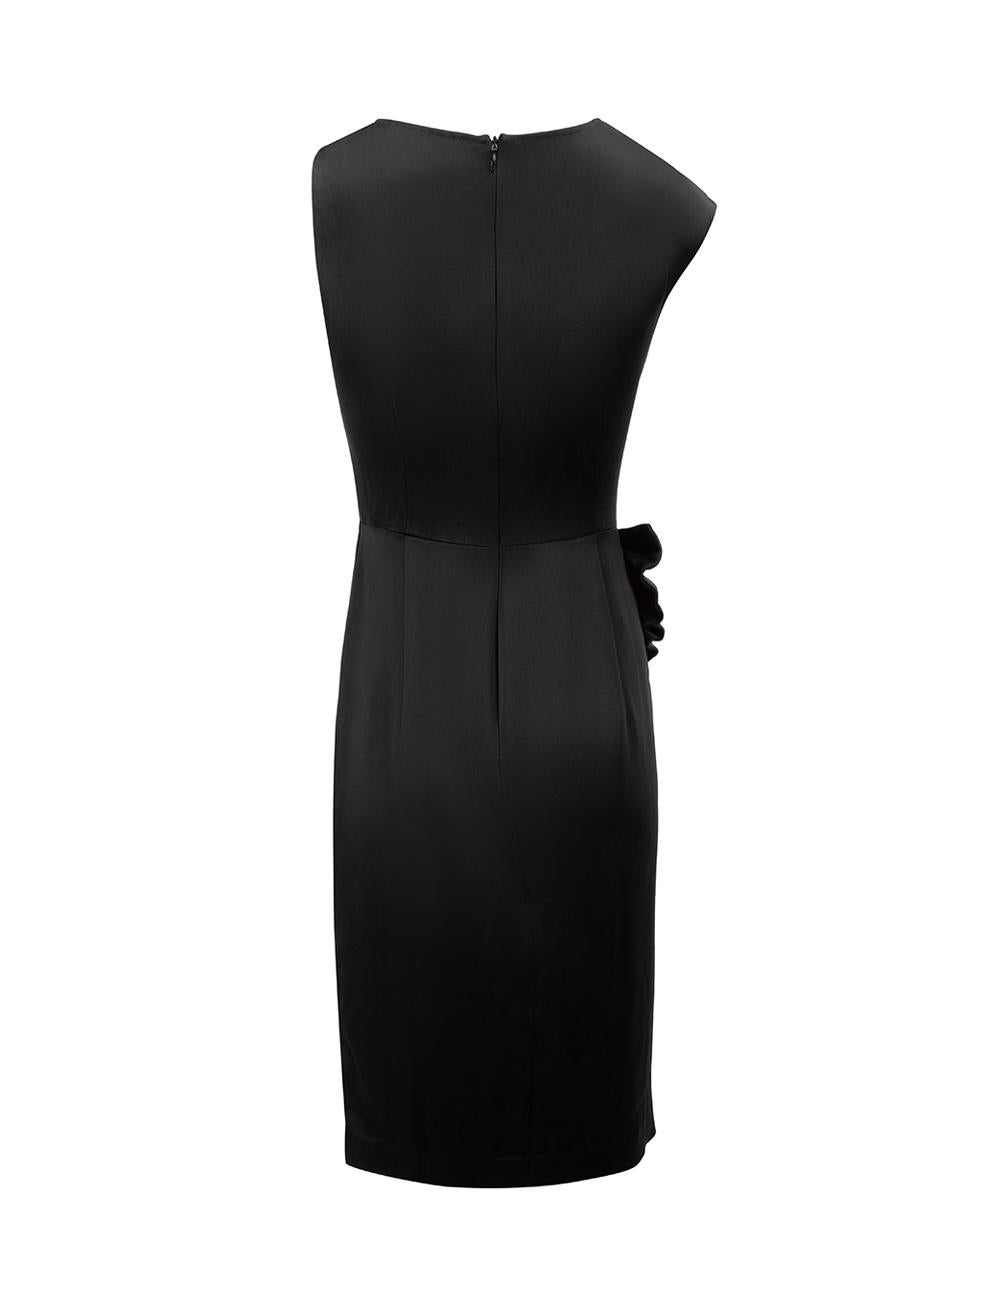 3.1 Phillip Lim Women's Black Silk Gathered Bow Details Knee Length Dress In Good Condition In London, GB